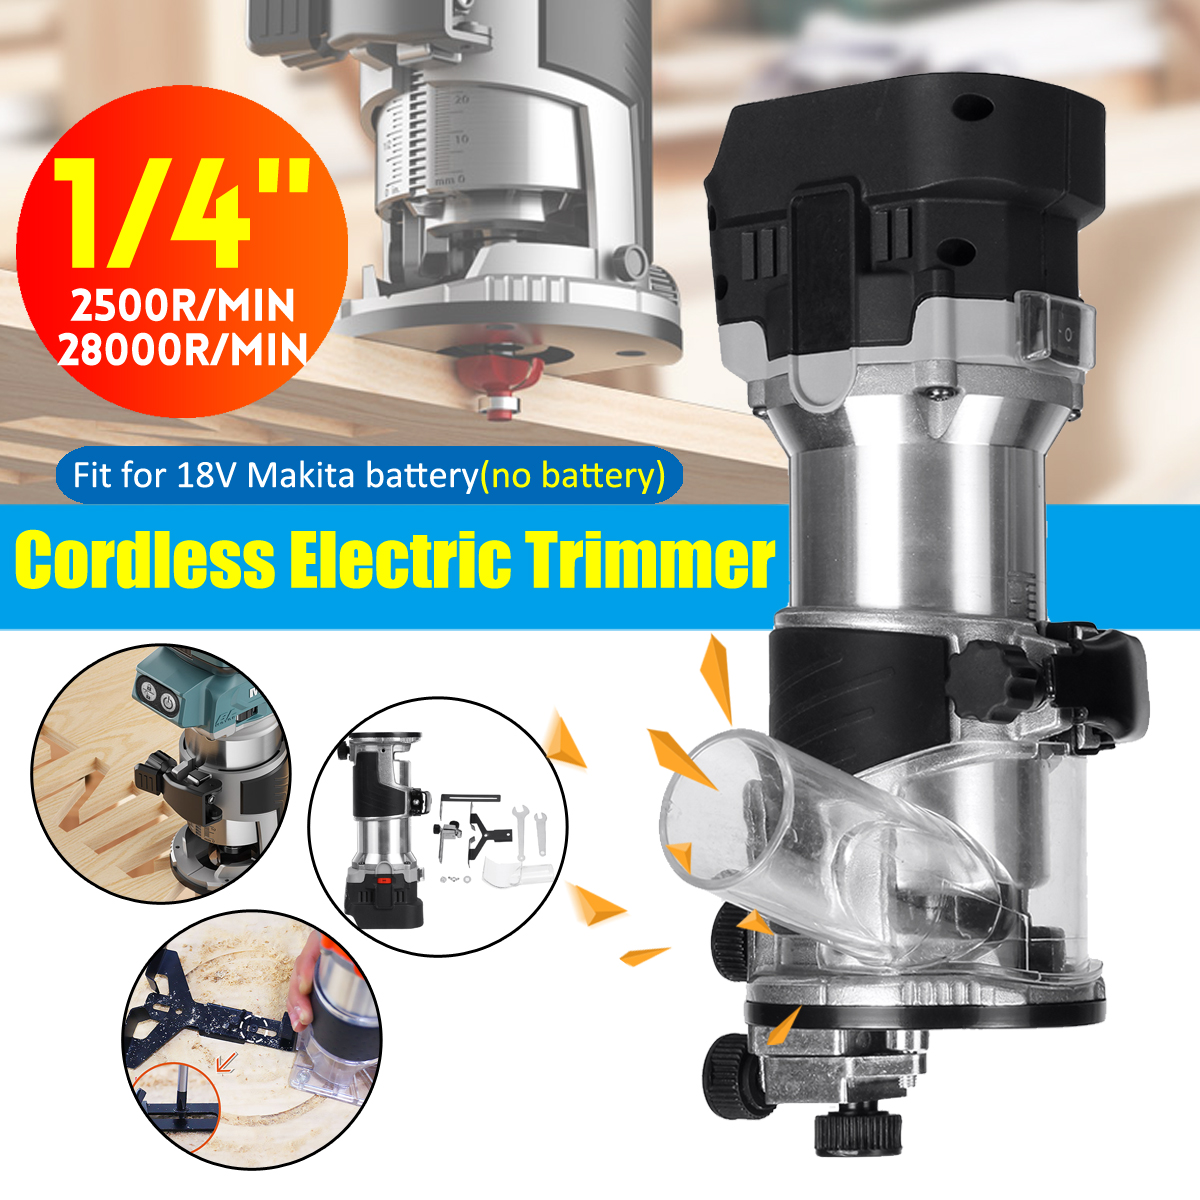 Drillpro-Cordless-Electric-Hand-Trimmer-Wood-Trimming-Machine-Wood-Router-For-Makita-18V-Battery-Por-1860870-1